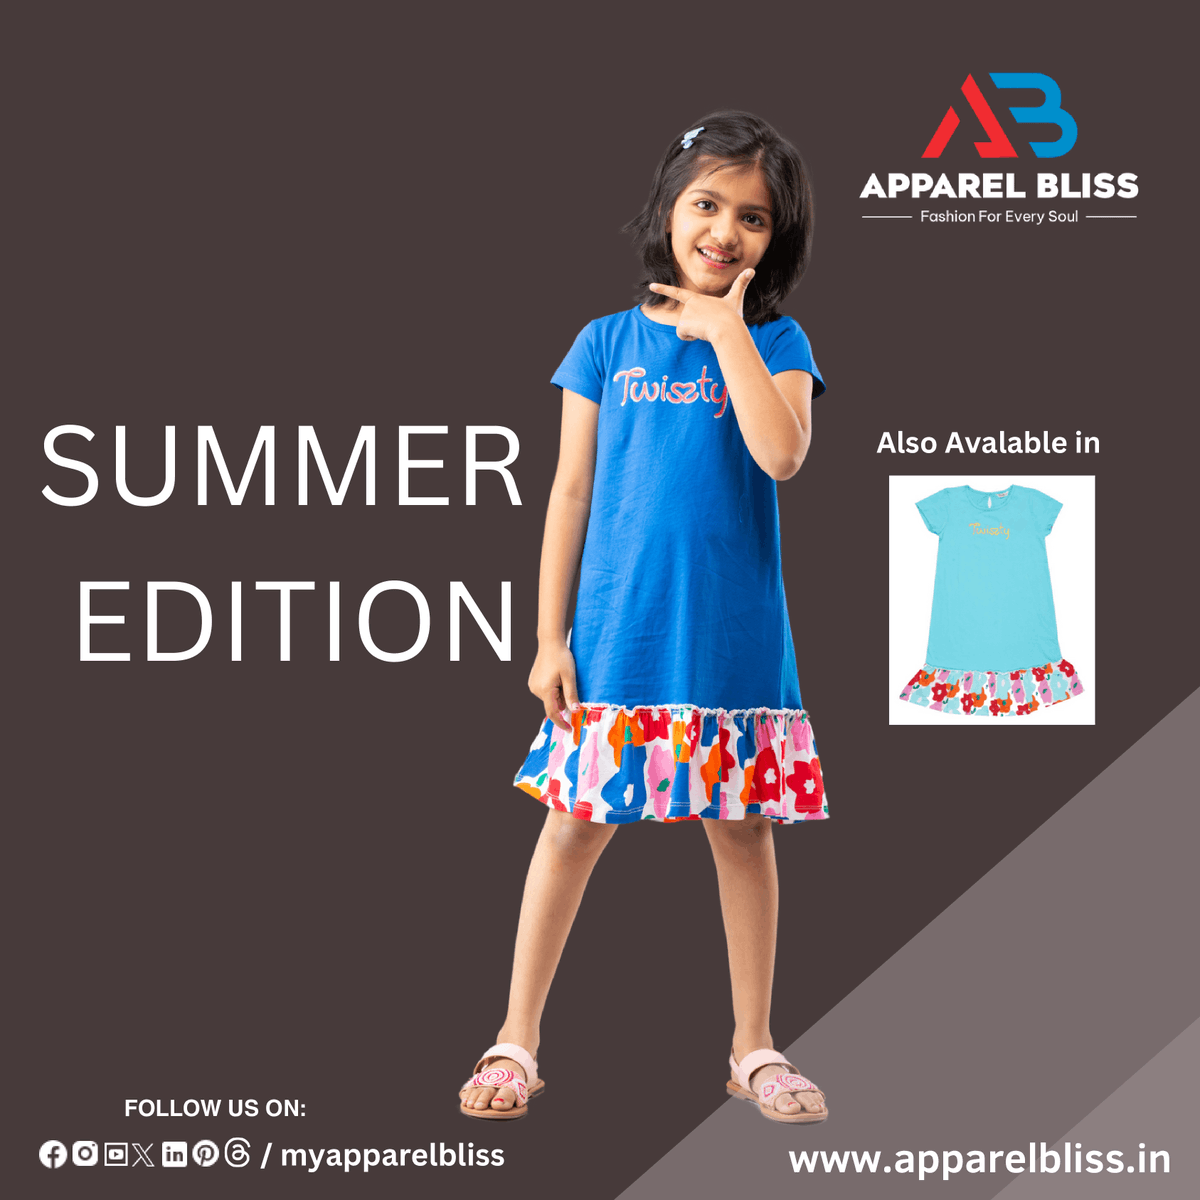 Make a stylish statement with our trendy tops for girls from Apparel Bliss, ideal for injecting vibrant colors into any ensemble.
.
👕Code: TWDRSS517DB
.
✅ Upto: 30% discount
✅ Free Shipping
✅ COD

🛒 Shop Online: e6n5.short.gy/Q8nDMv

#tops | #girlswear | #shopping |